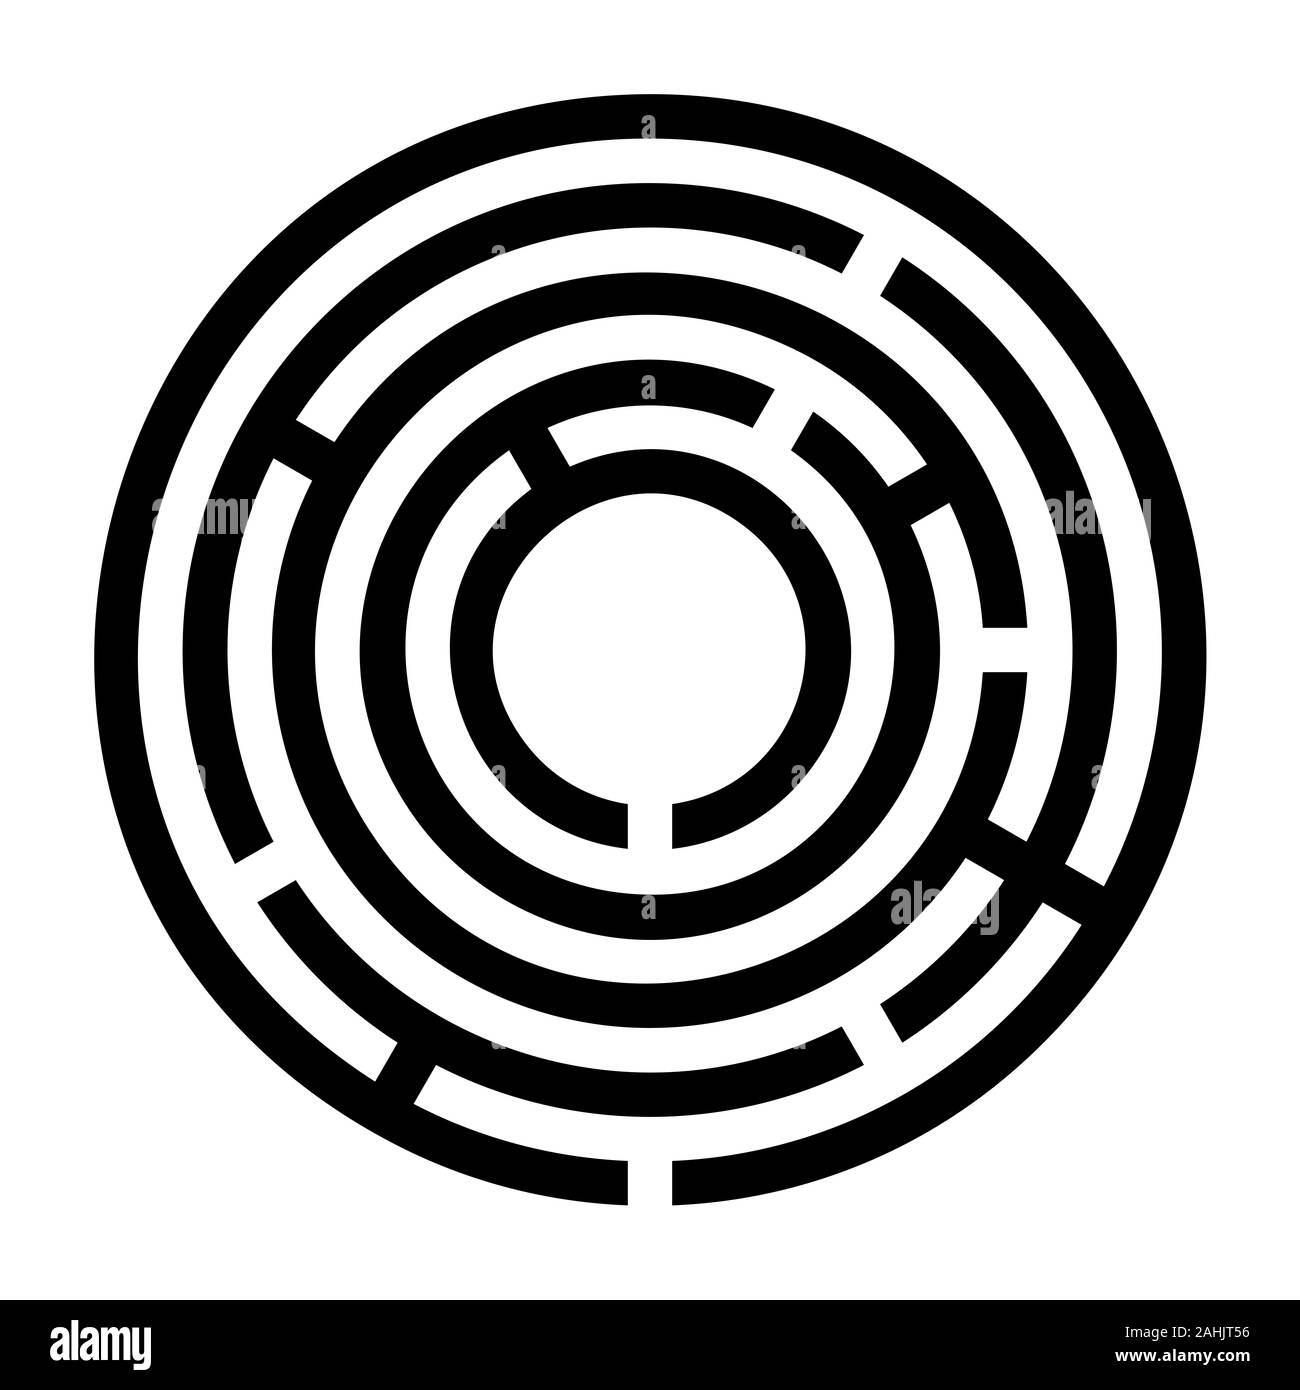 Tiny black circular maze. Radial labyrinth. Find a route to the centre. Print out and follow the path by a pencil or fingertip. Collection of paths. Stock Photo